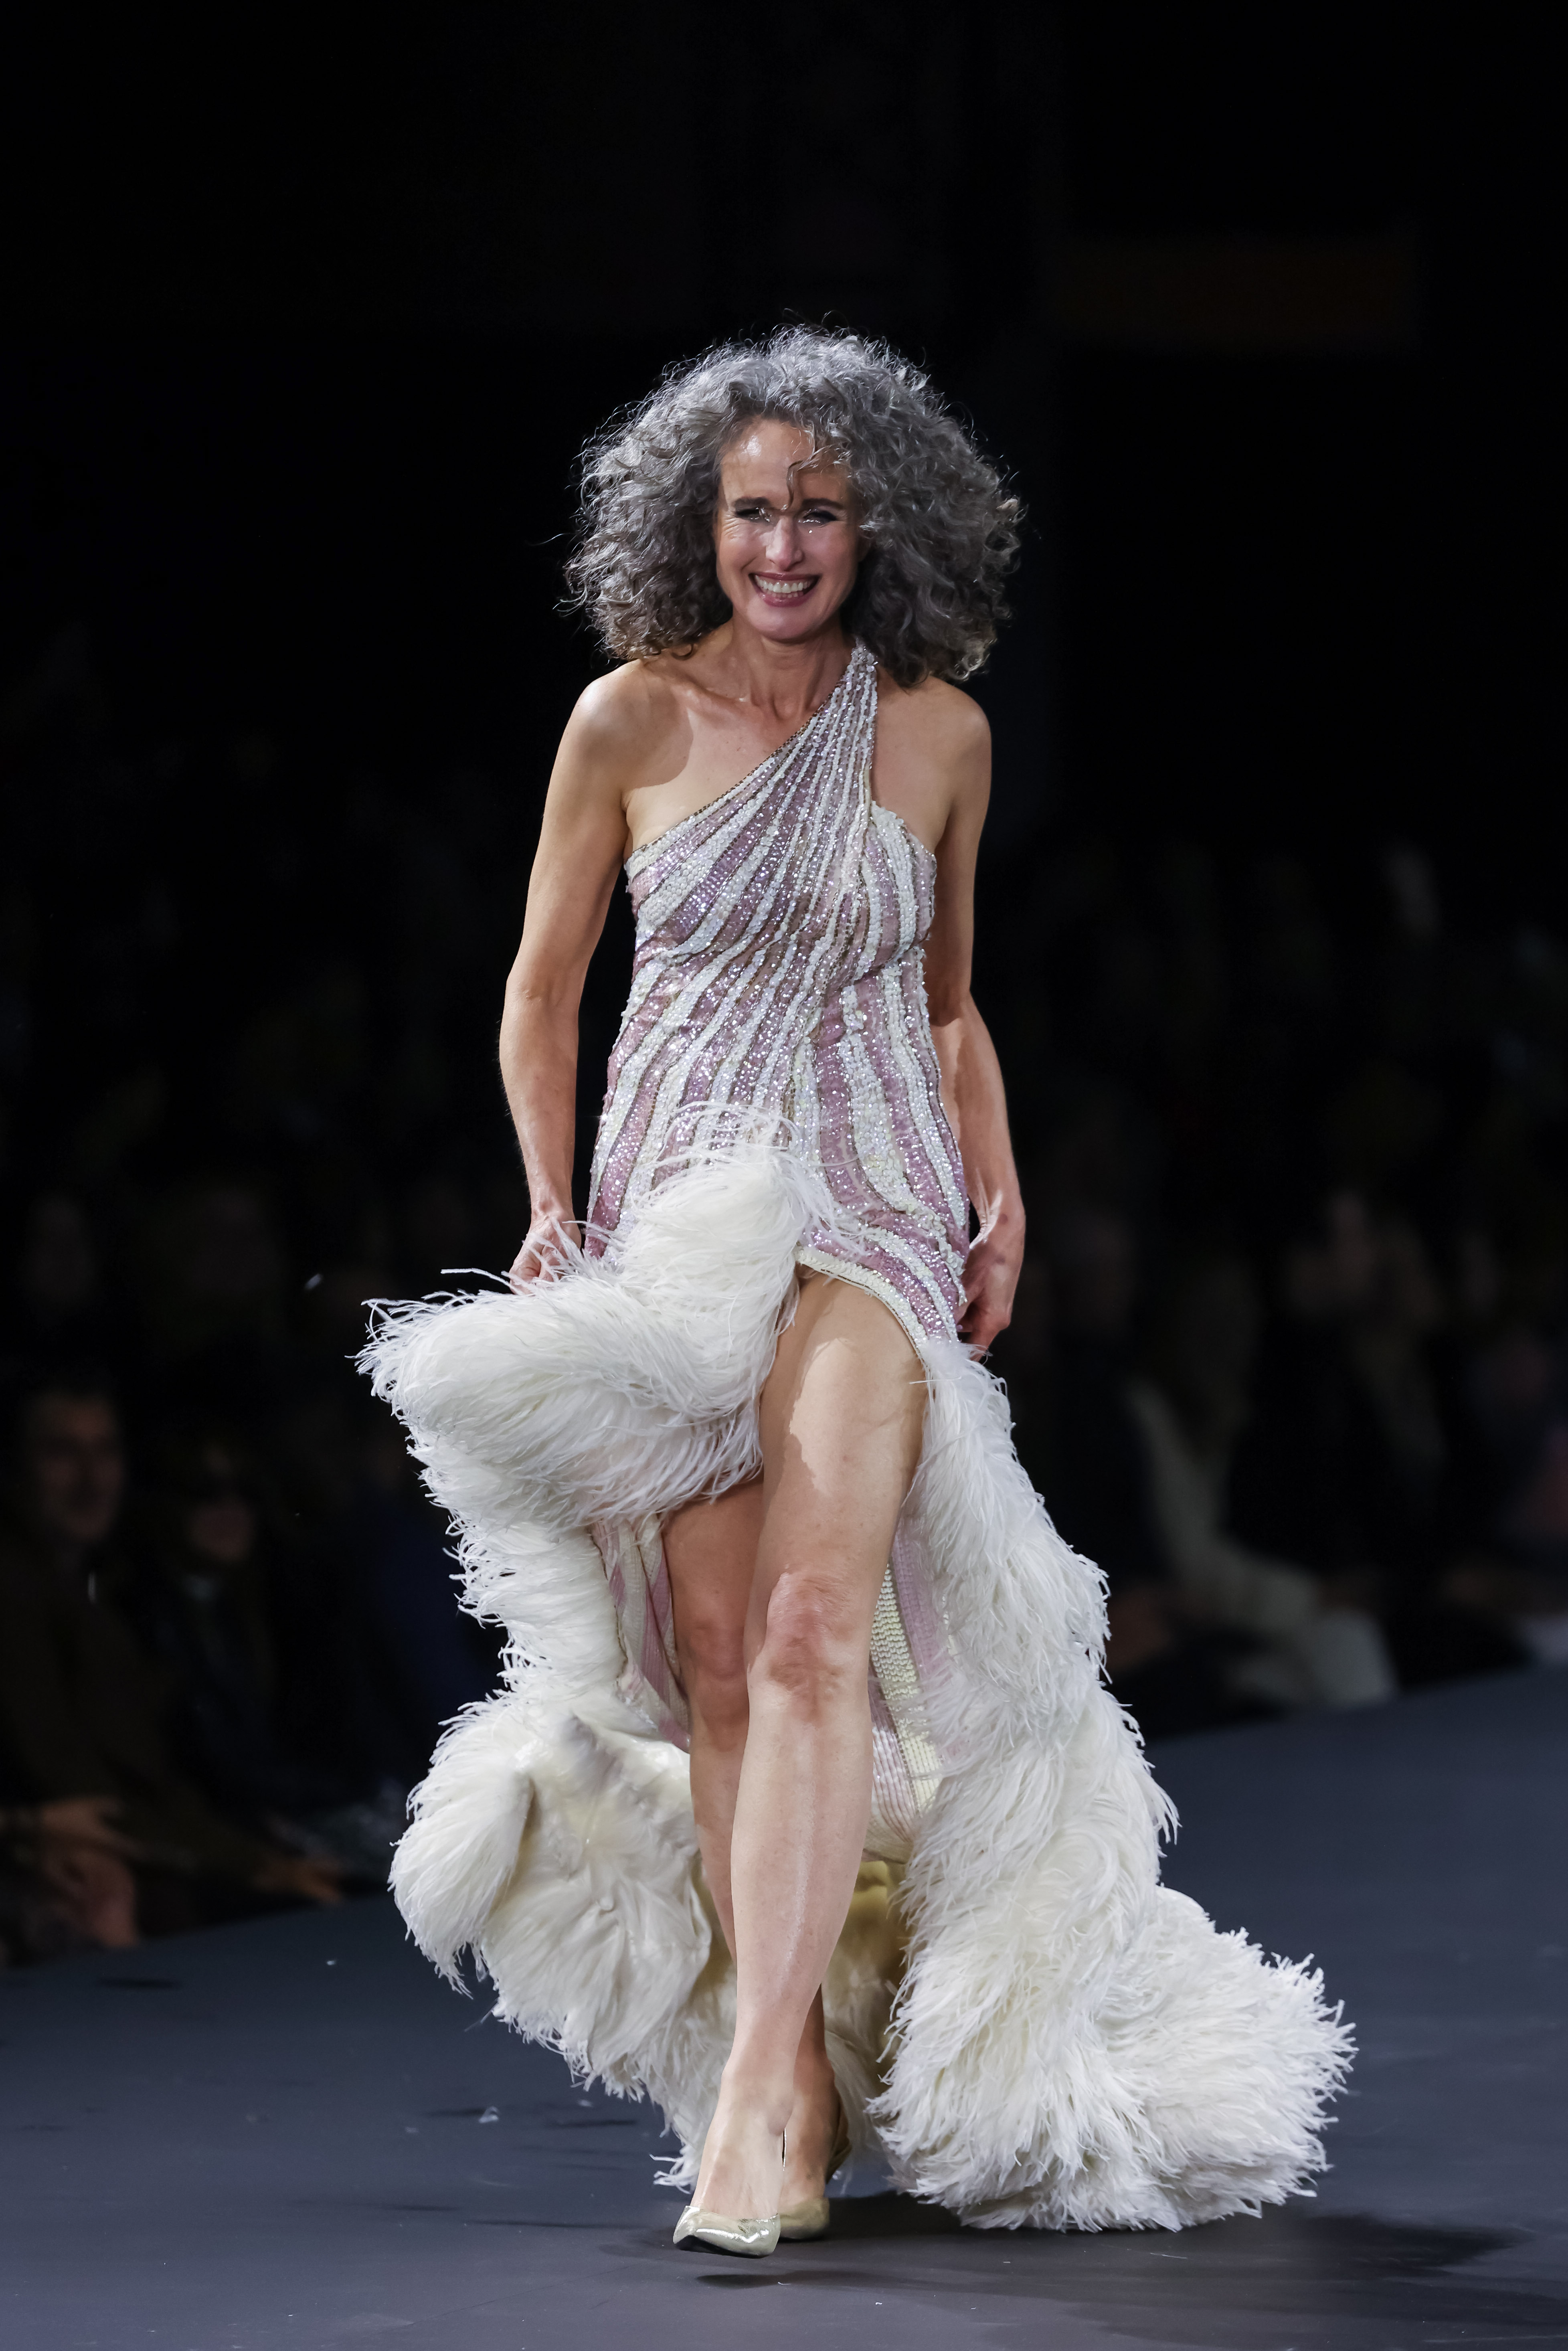 Andie MacDowell graces the runway during the "Le Défilé Walk Your Worth" by L'Oreal Womenswear Spring/Summer 2023 show as part of Paris Fashion Week on October 2, 2022, in Paris, France | Source: Getty Images